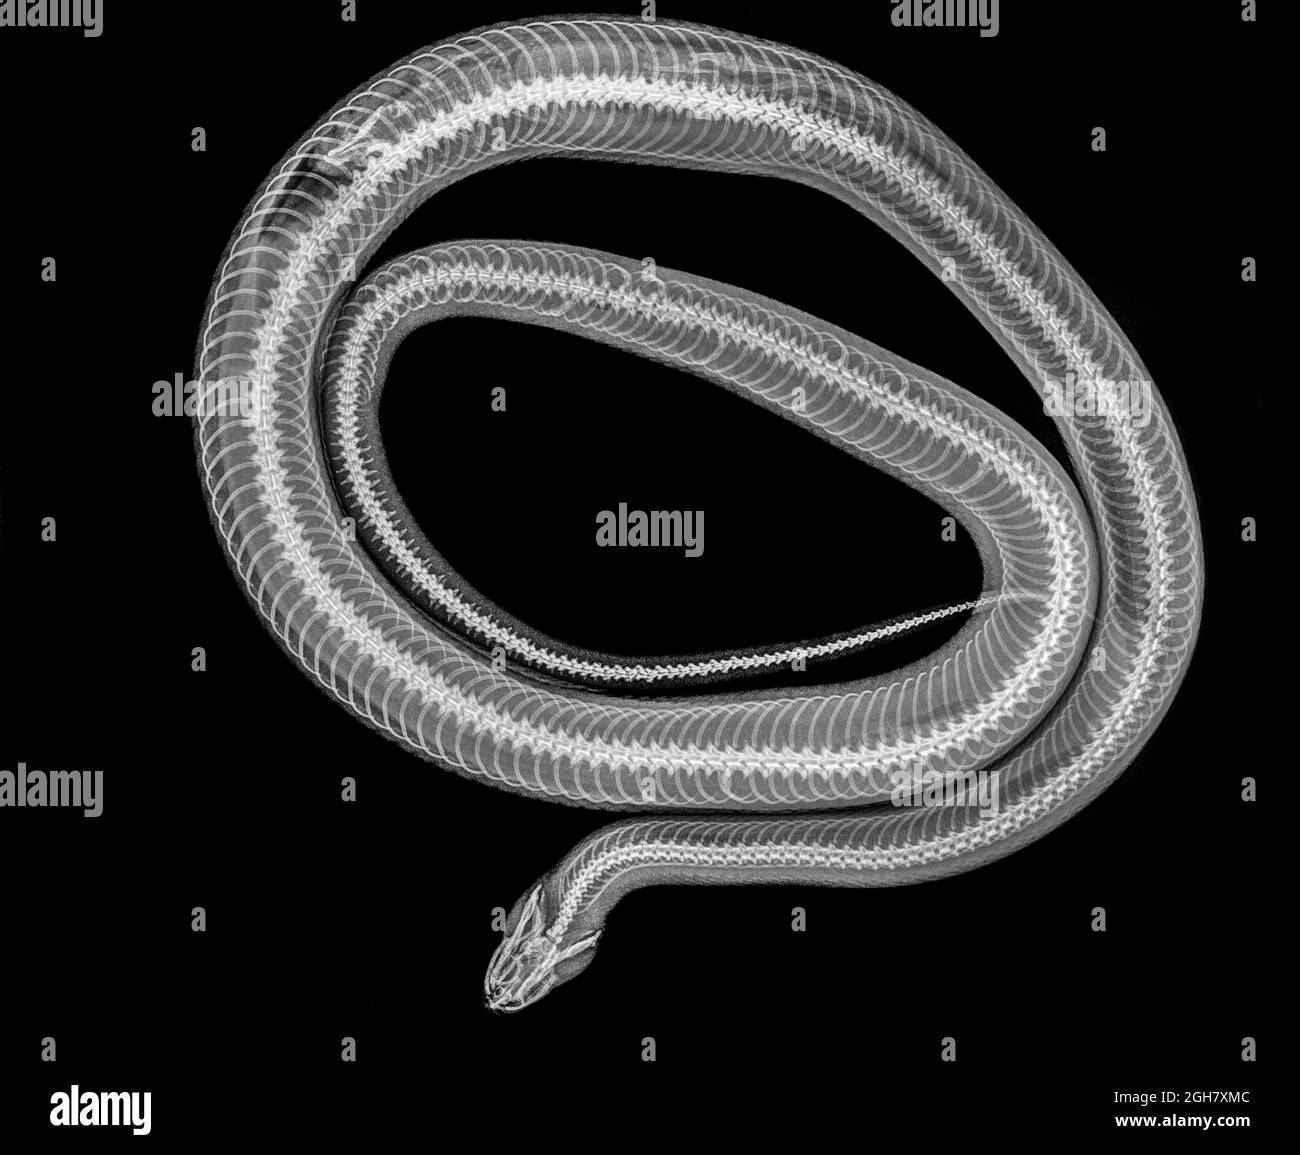 Coiled Snake under x-ray a whole mouse can be seen being digested on the left Stock Photo